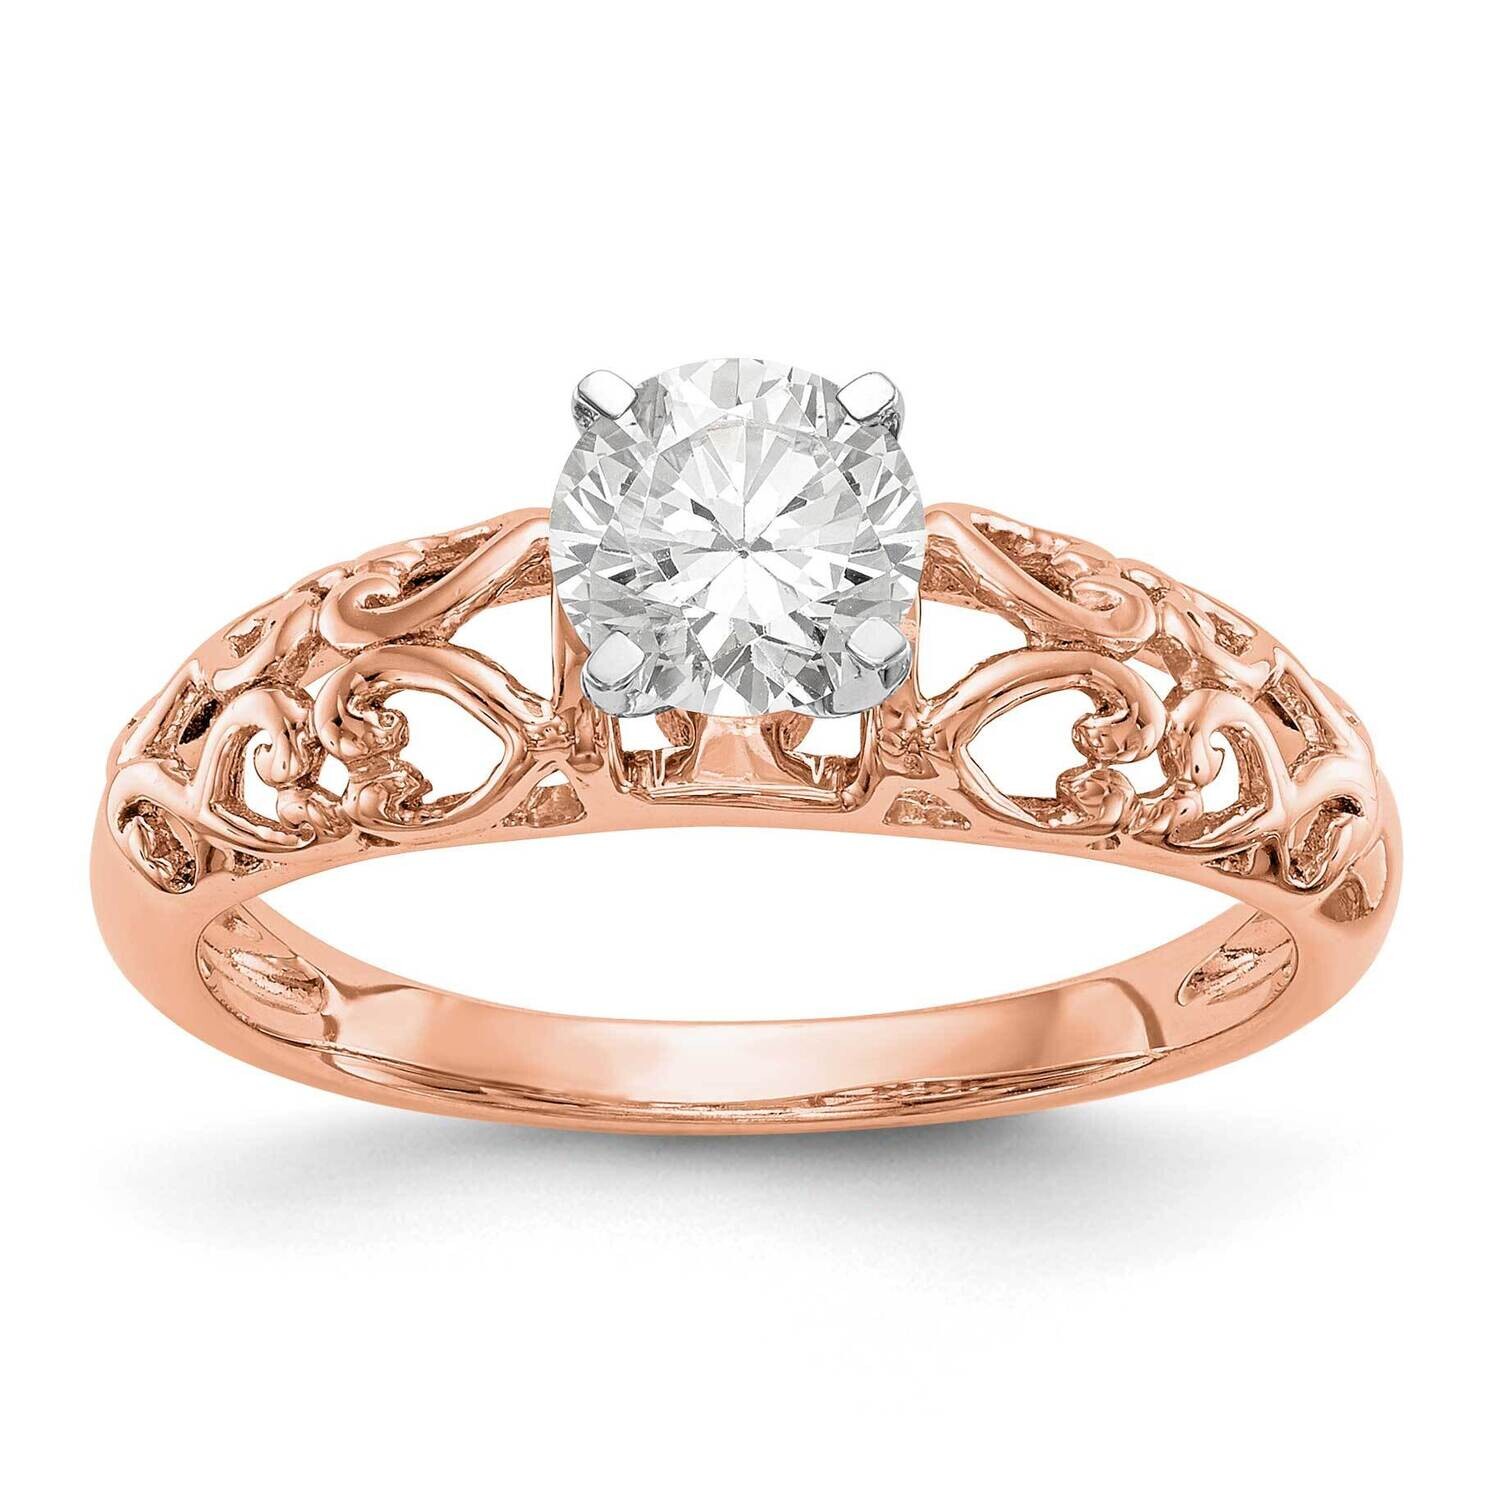 Peg Set Solitaire Engagement Ring Mounting 10k Rose Gold RM1996E-R